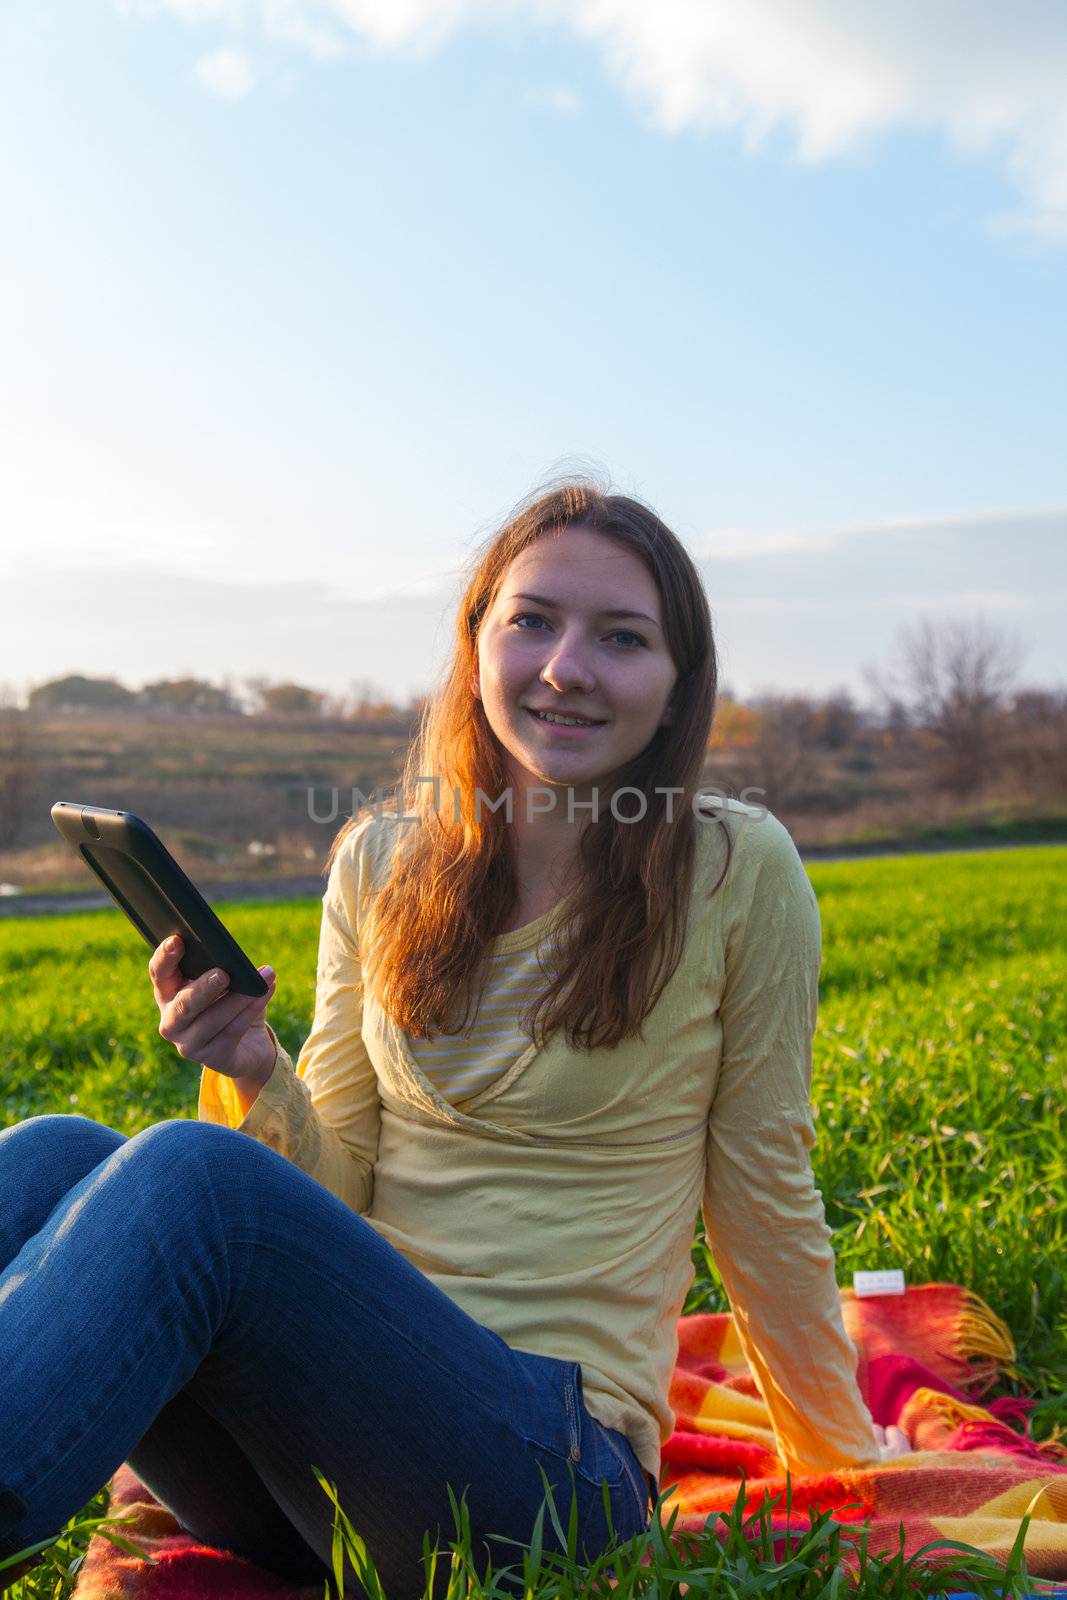 Teen girl reading electronic book sitting outdoors